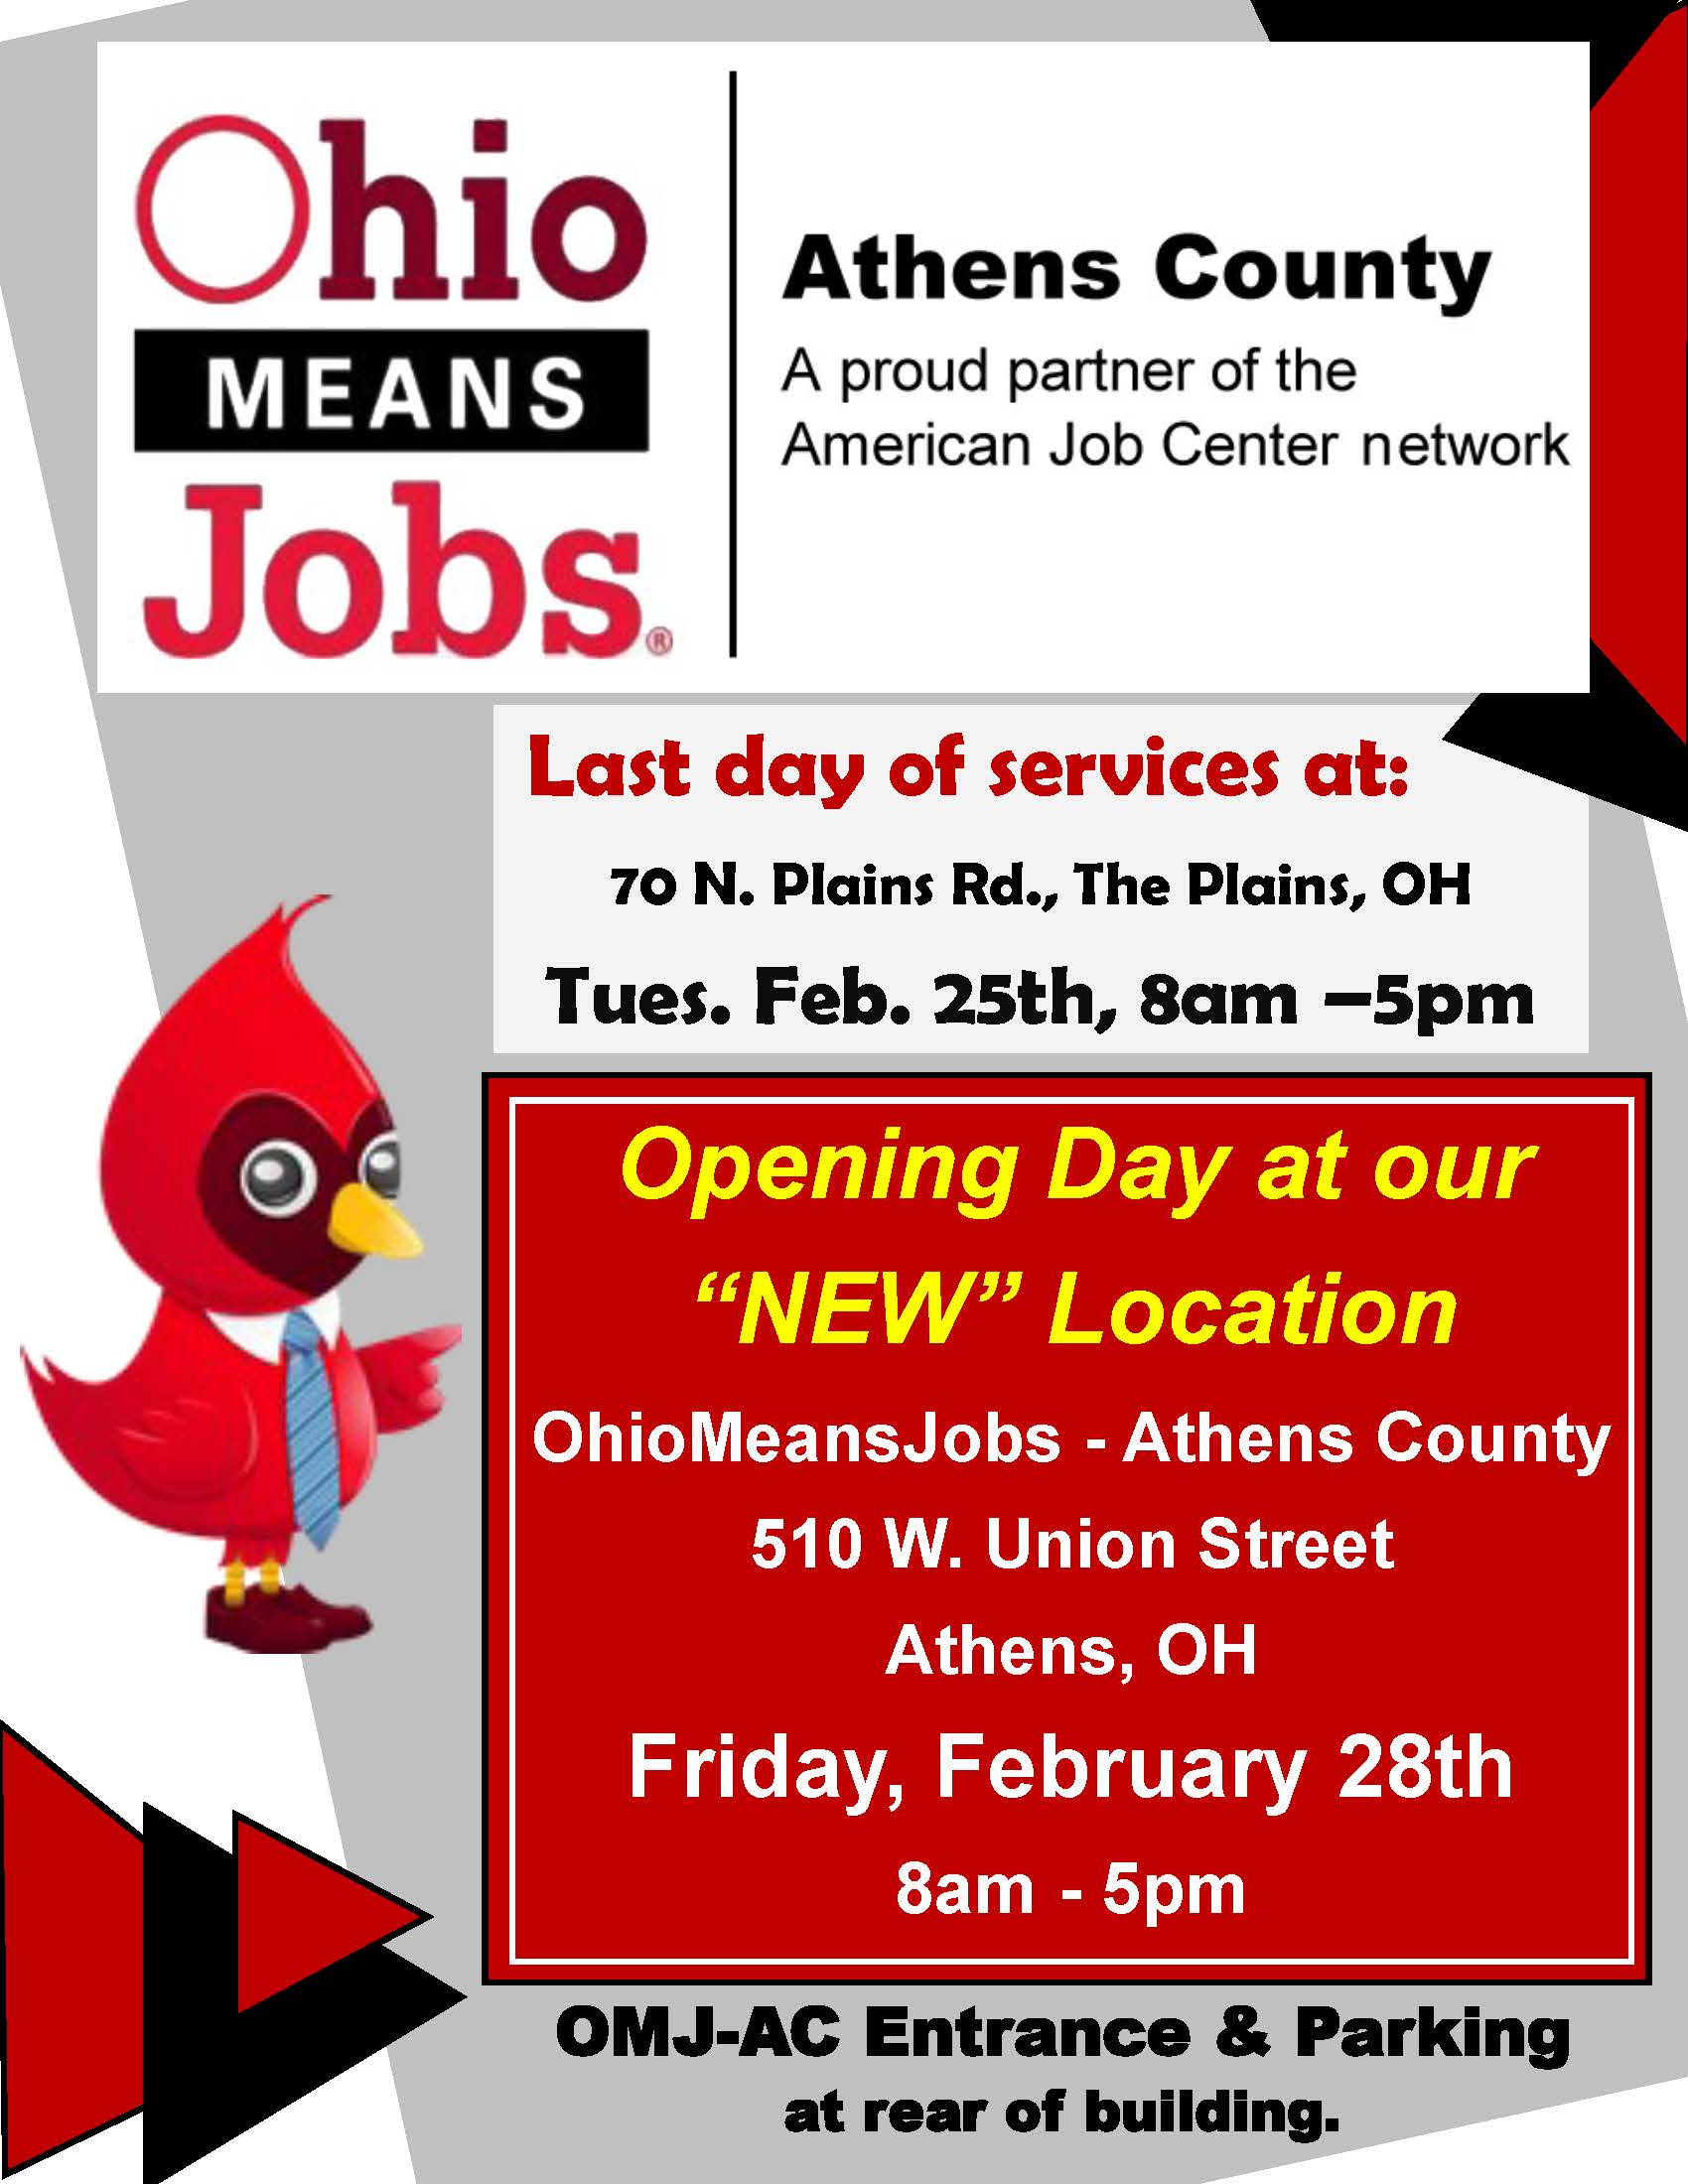 OhioMeansJobs Athens County Offices Are Moving WOUB Public Media